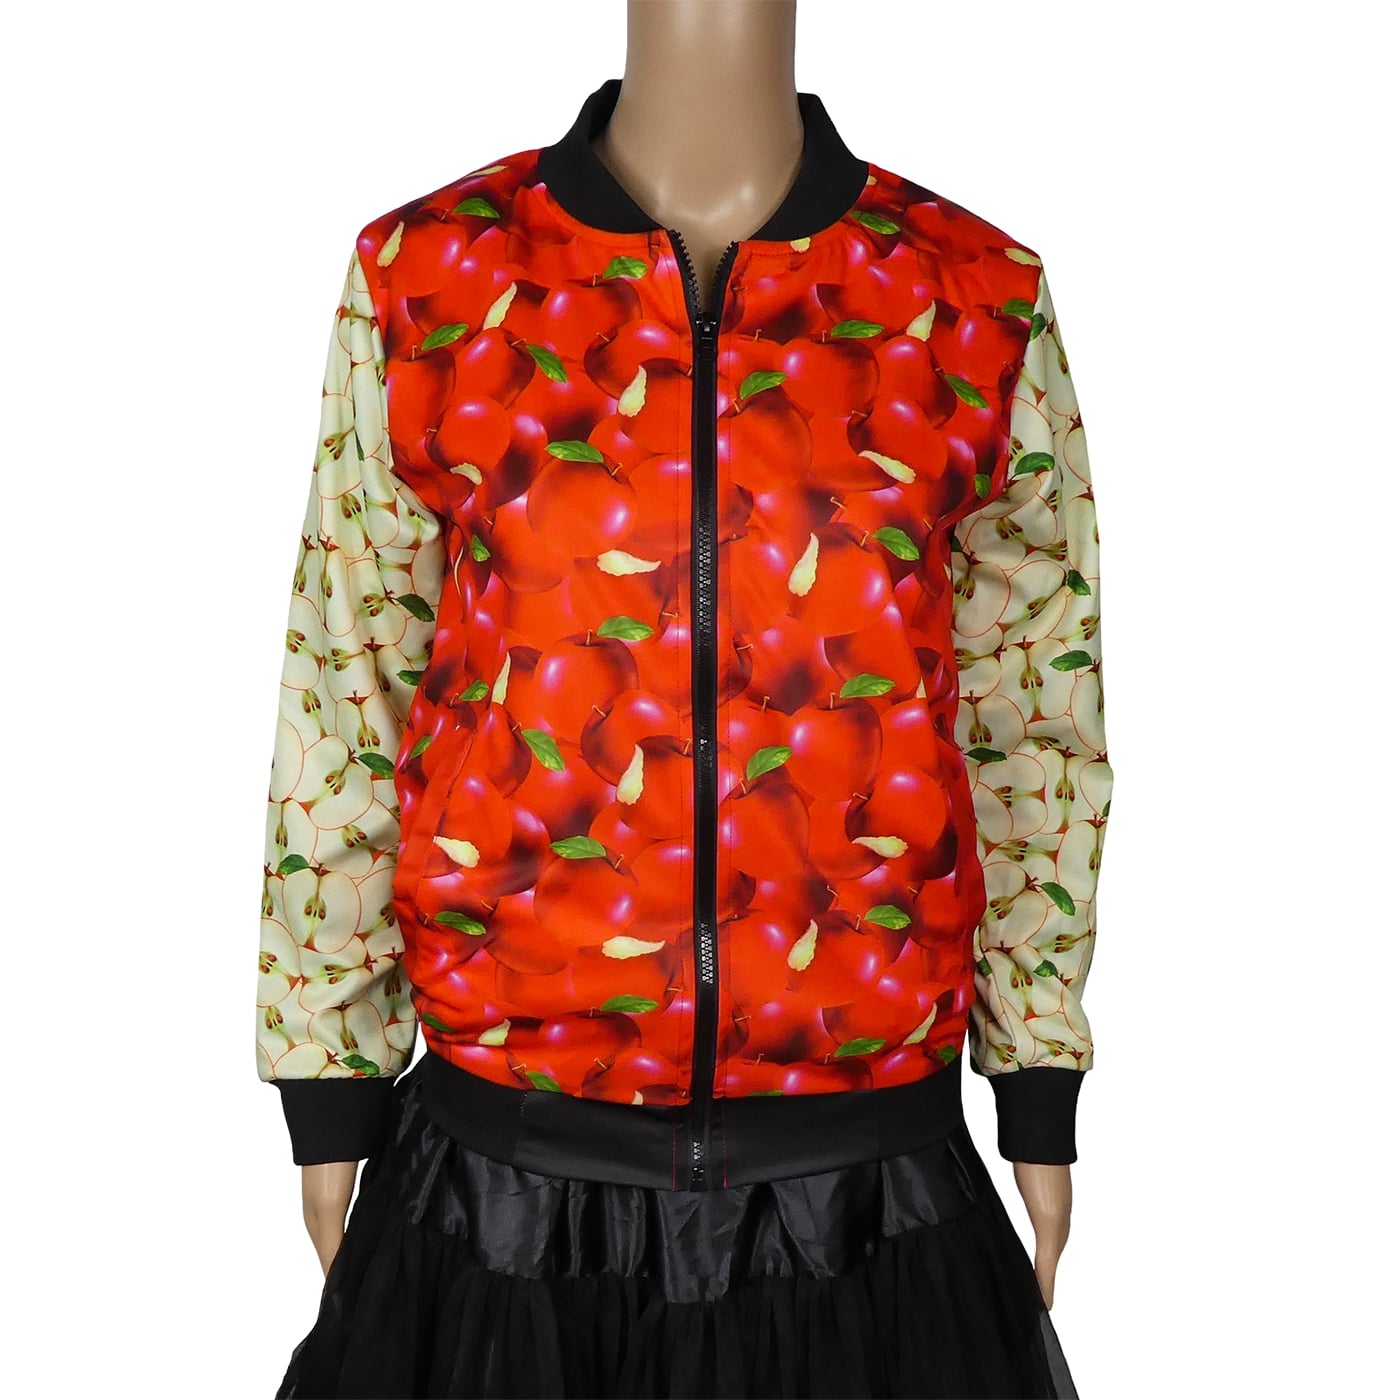 Orchard Bomber Jacket by RainbowsAndFairies.com (Red Apples - Apple Core - Snow White - Biker Jacket - Coat - Rock & Roll) - SKU: CL_BOMBJ_ORCHD_ORG - Pic 01